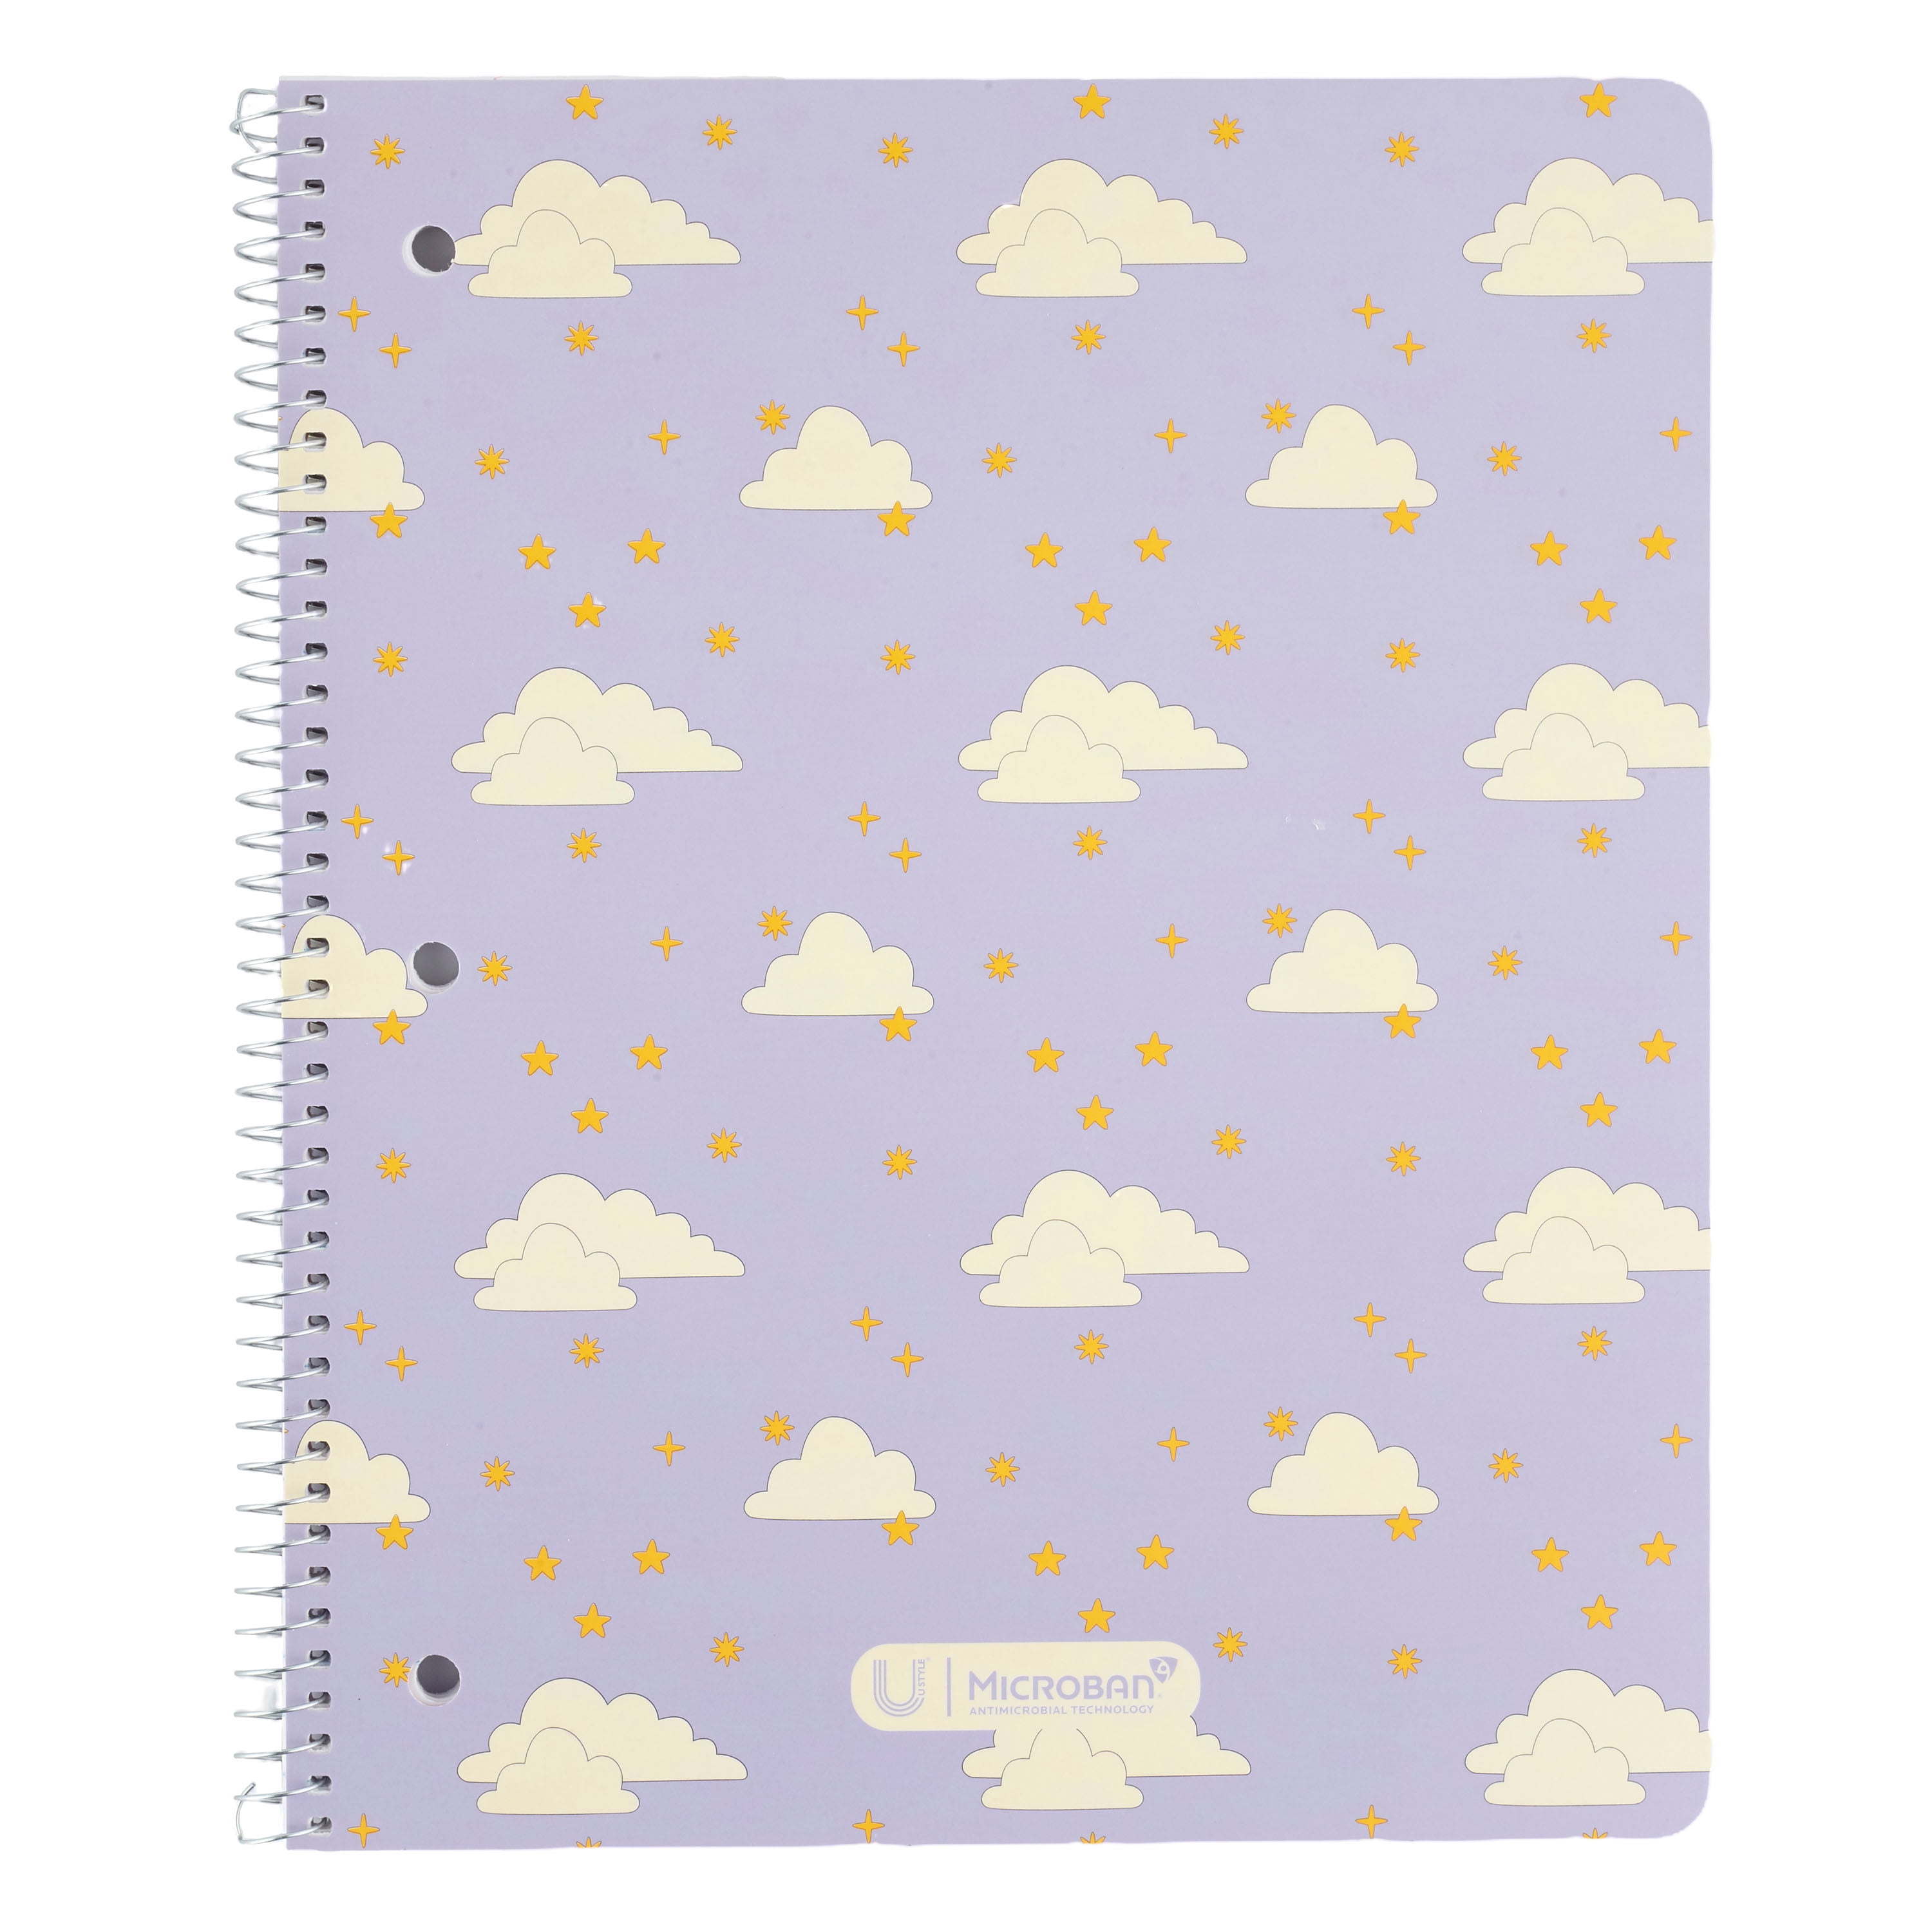 Heart & Soul Peace Frog Notebook No Lines w/ a Pen that Works Multi-Color